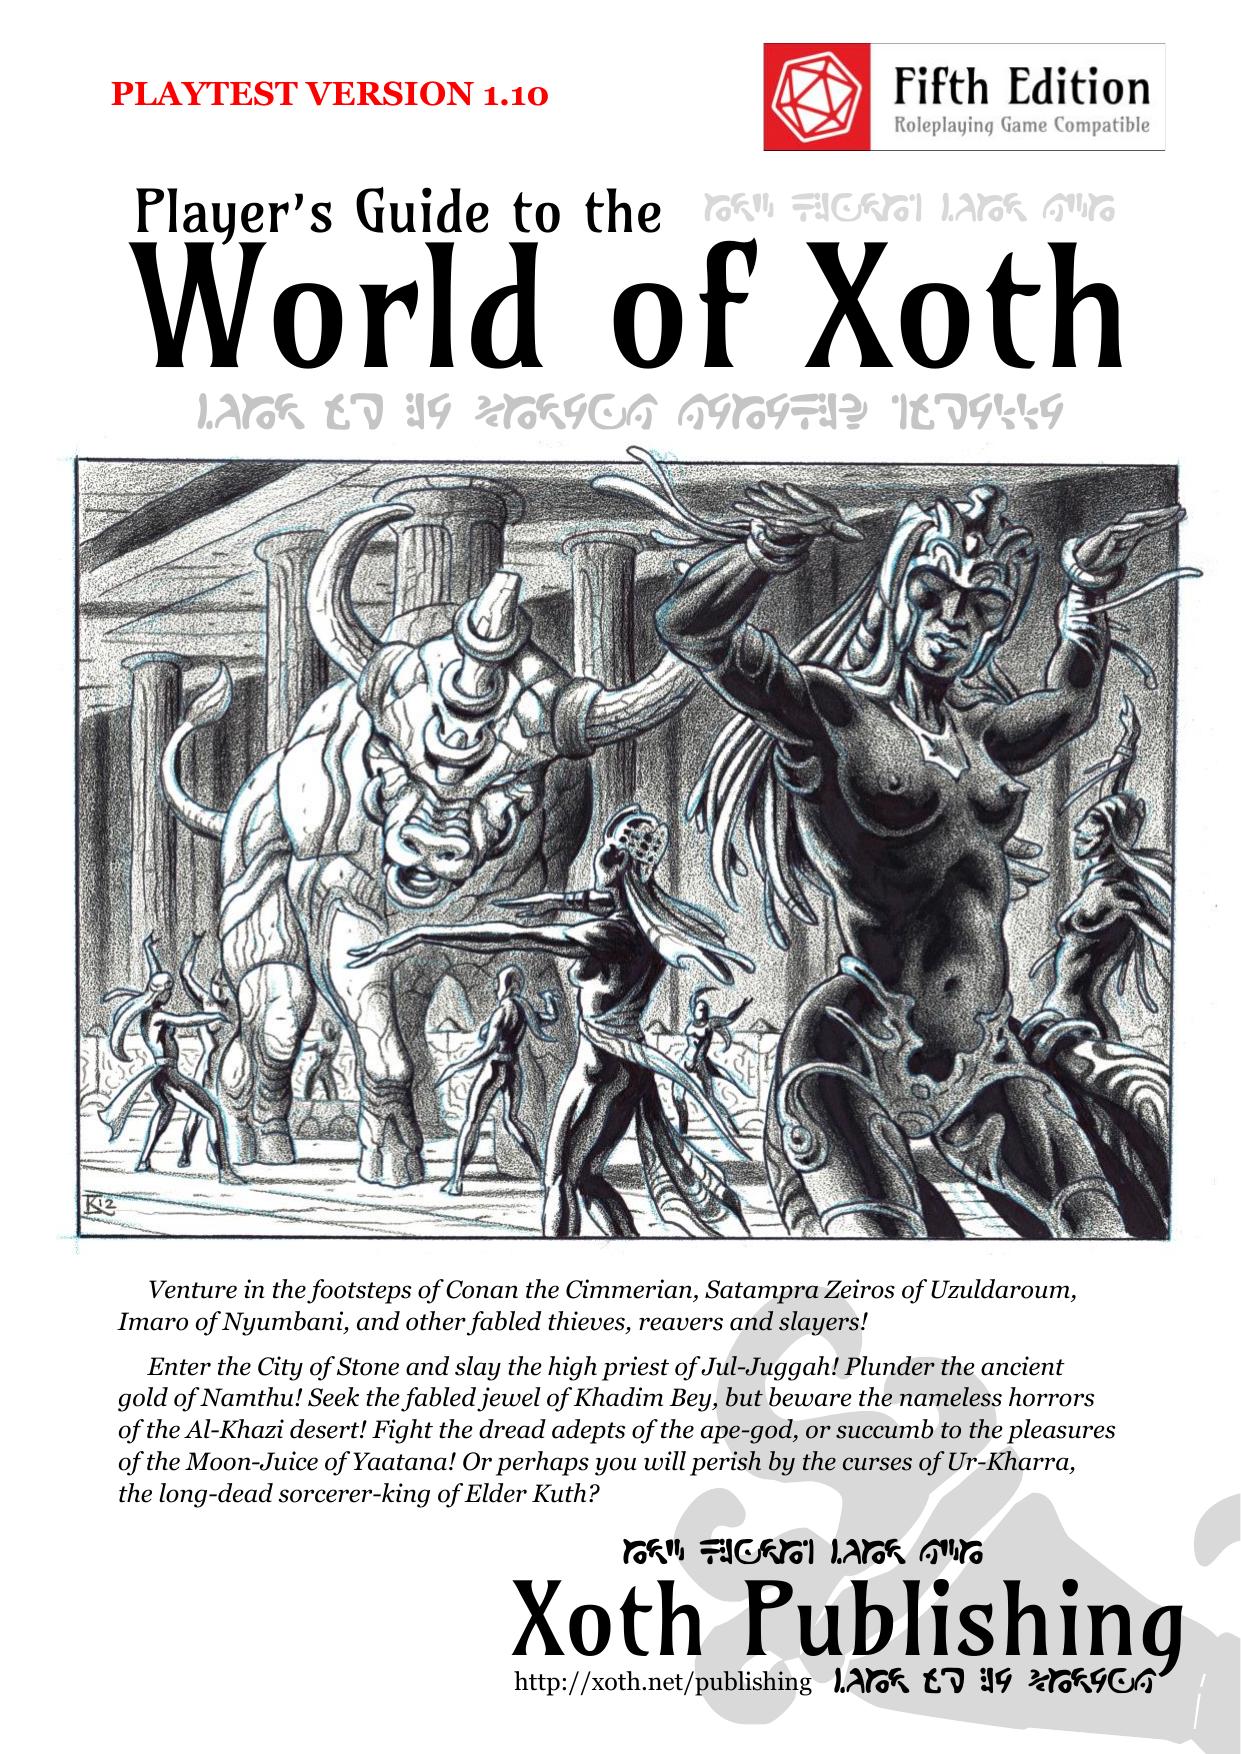 World of Xoth Players Guide for 5e [1.1]